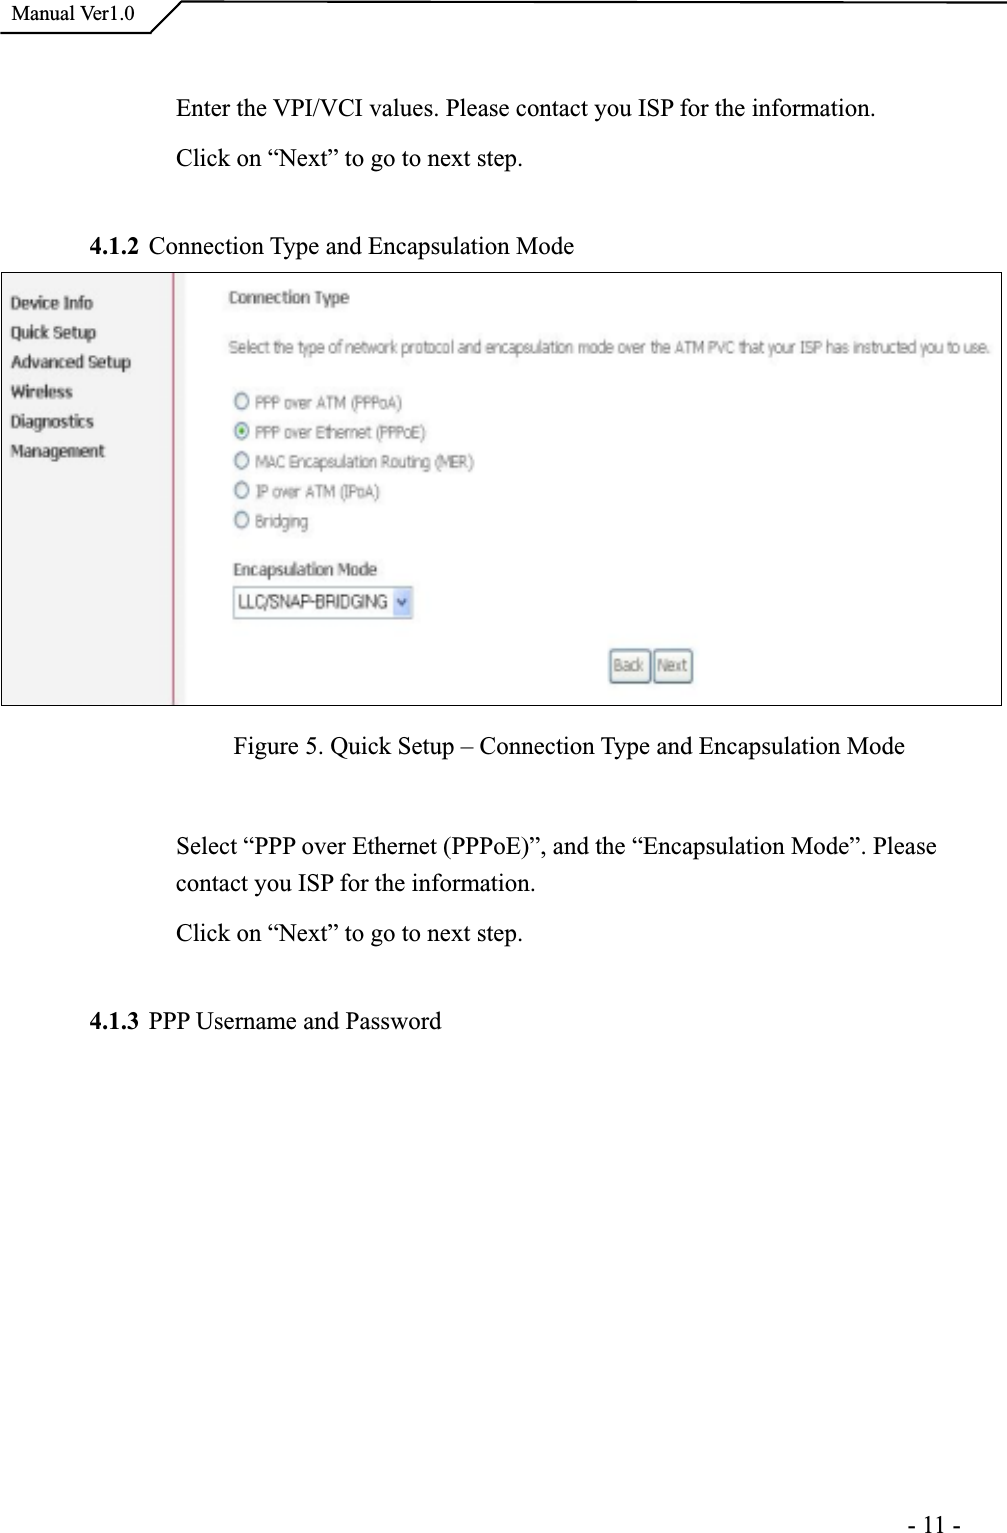  Manual Ver1.0Enter the VPI/VCI values. Please contact you ISP for the information.Click on “Next” to go to next step. 4.1.2 Connection Type and Encapsulation Mode Figure 5. Quick Setup – Connection Type and Encapsulation Mode Select “PPP over Ethernet (PPPoE)”, and the “Encapsulation Mode”. Please contact you ISP for the information.Click on “Next” to go to next step. 4.1.3 PPP Username and Password                                                                     -11-